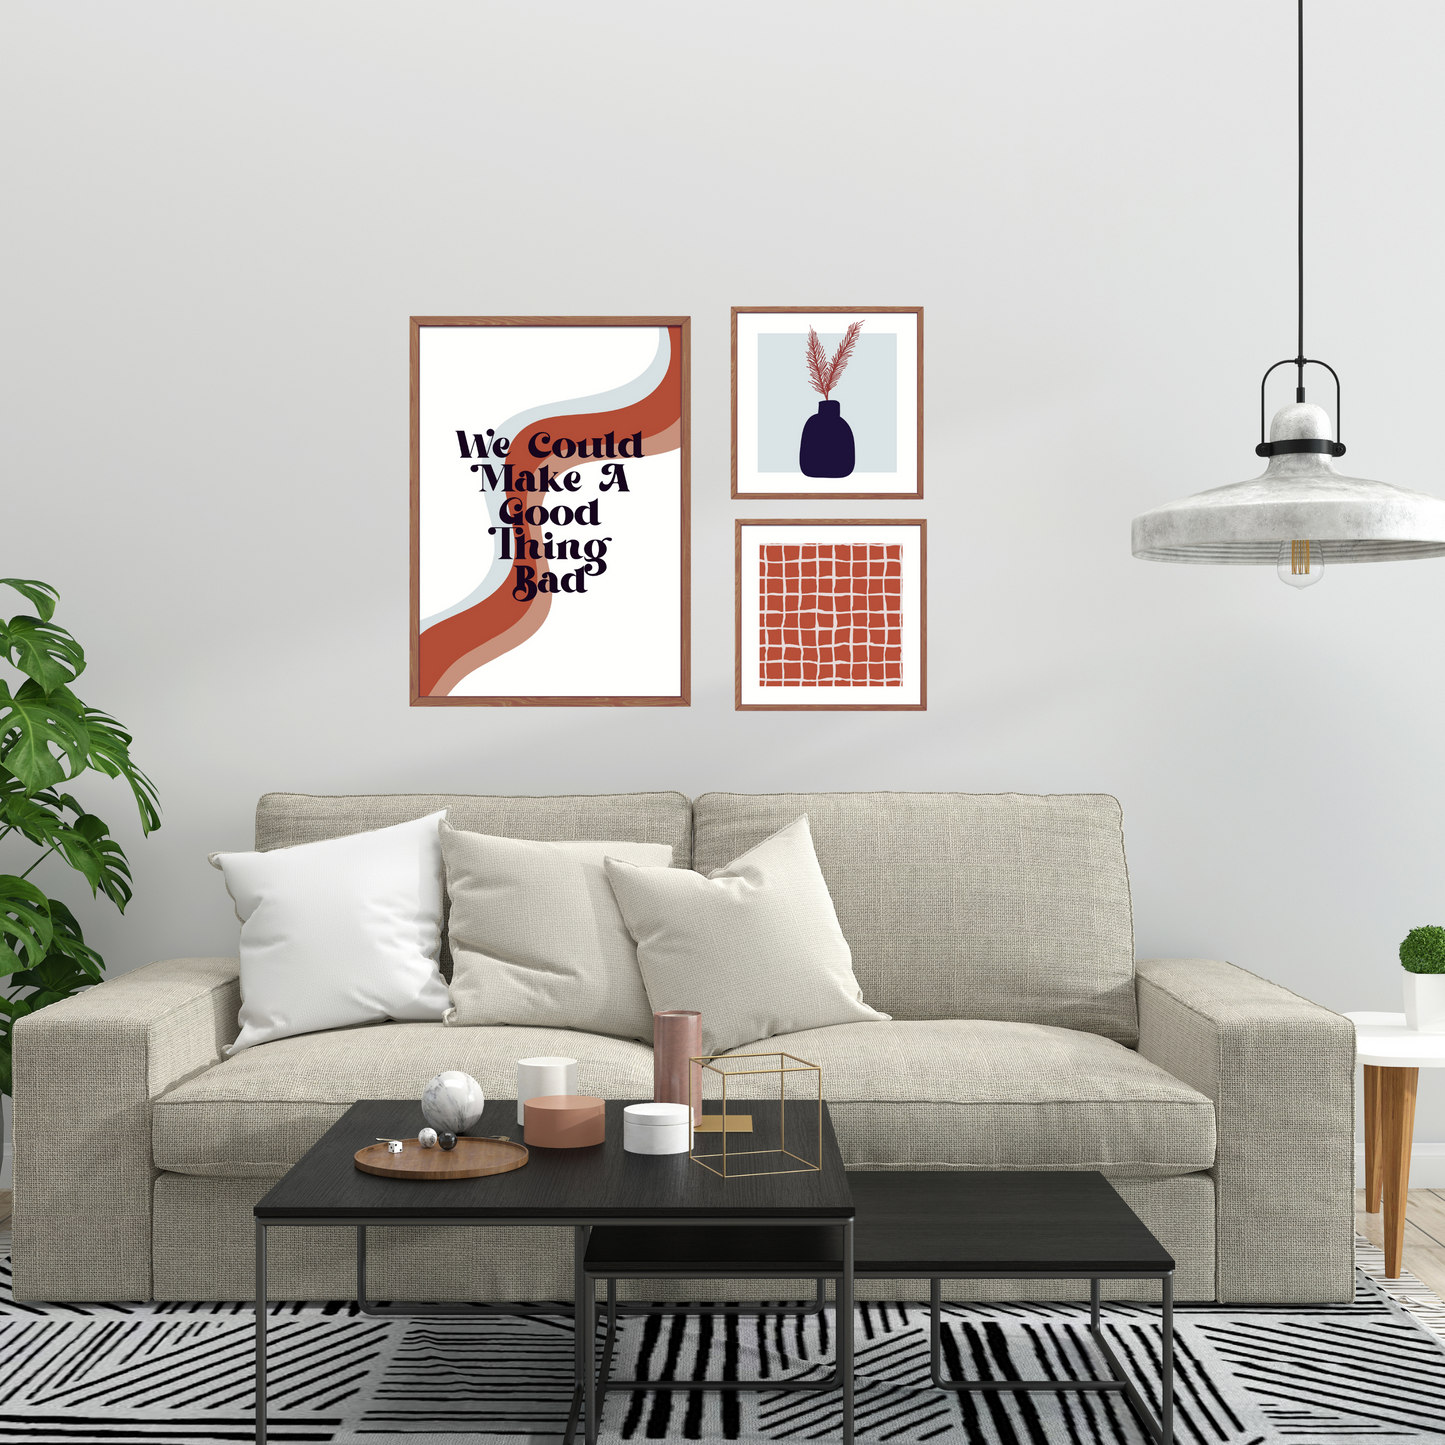 Introducing our stunning square boho-inspired art print, designed to make a statement in any space. Featuring a relaxed grid pattern on a warm and inviting terracotta background, this piece adds bohemian charm to your home decor.